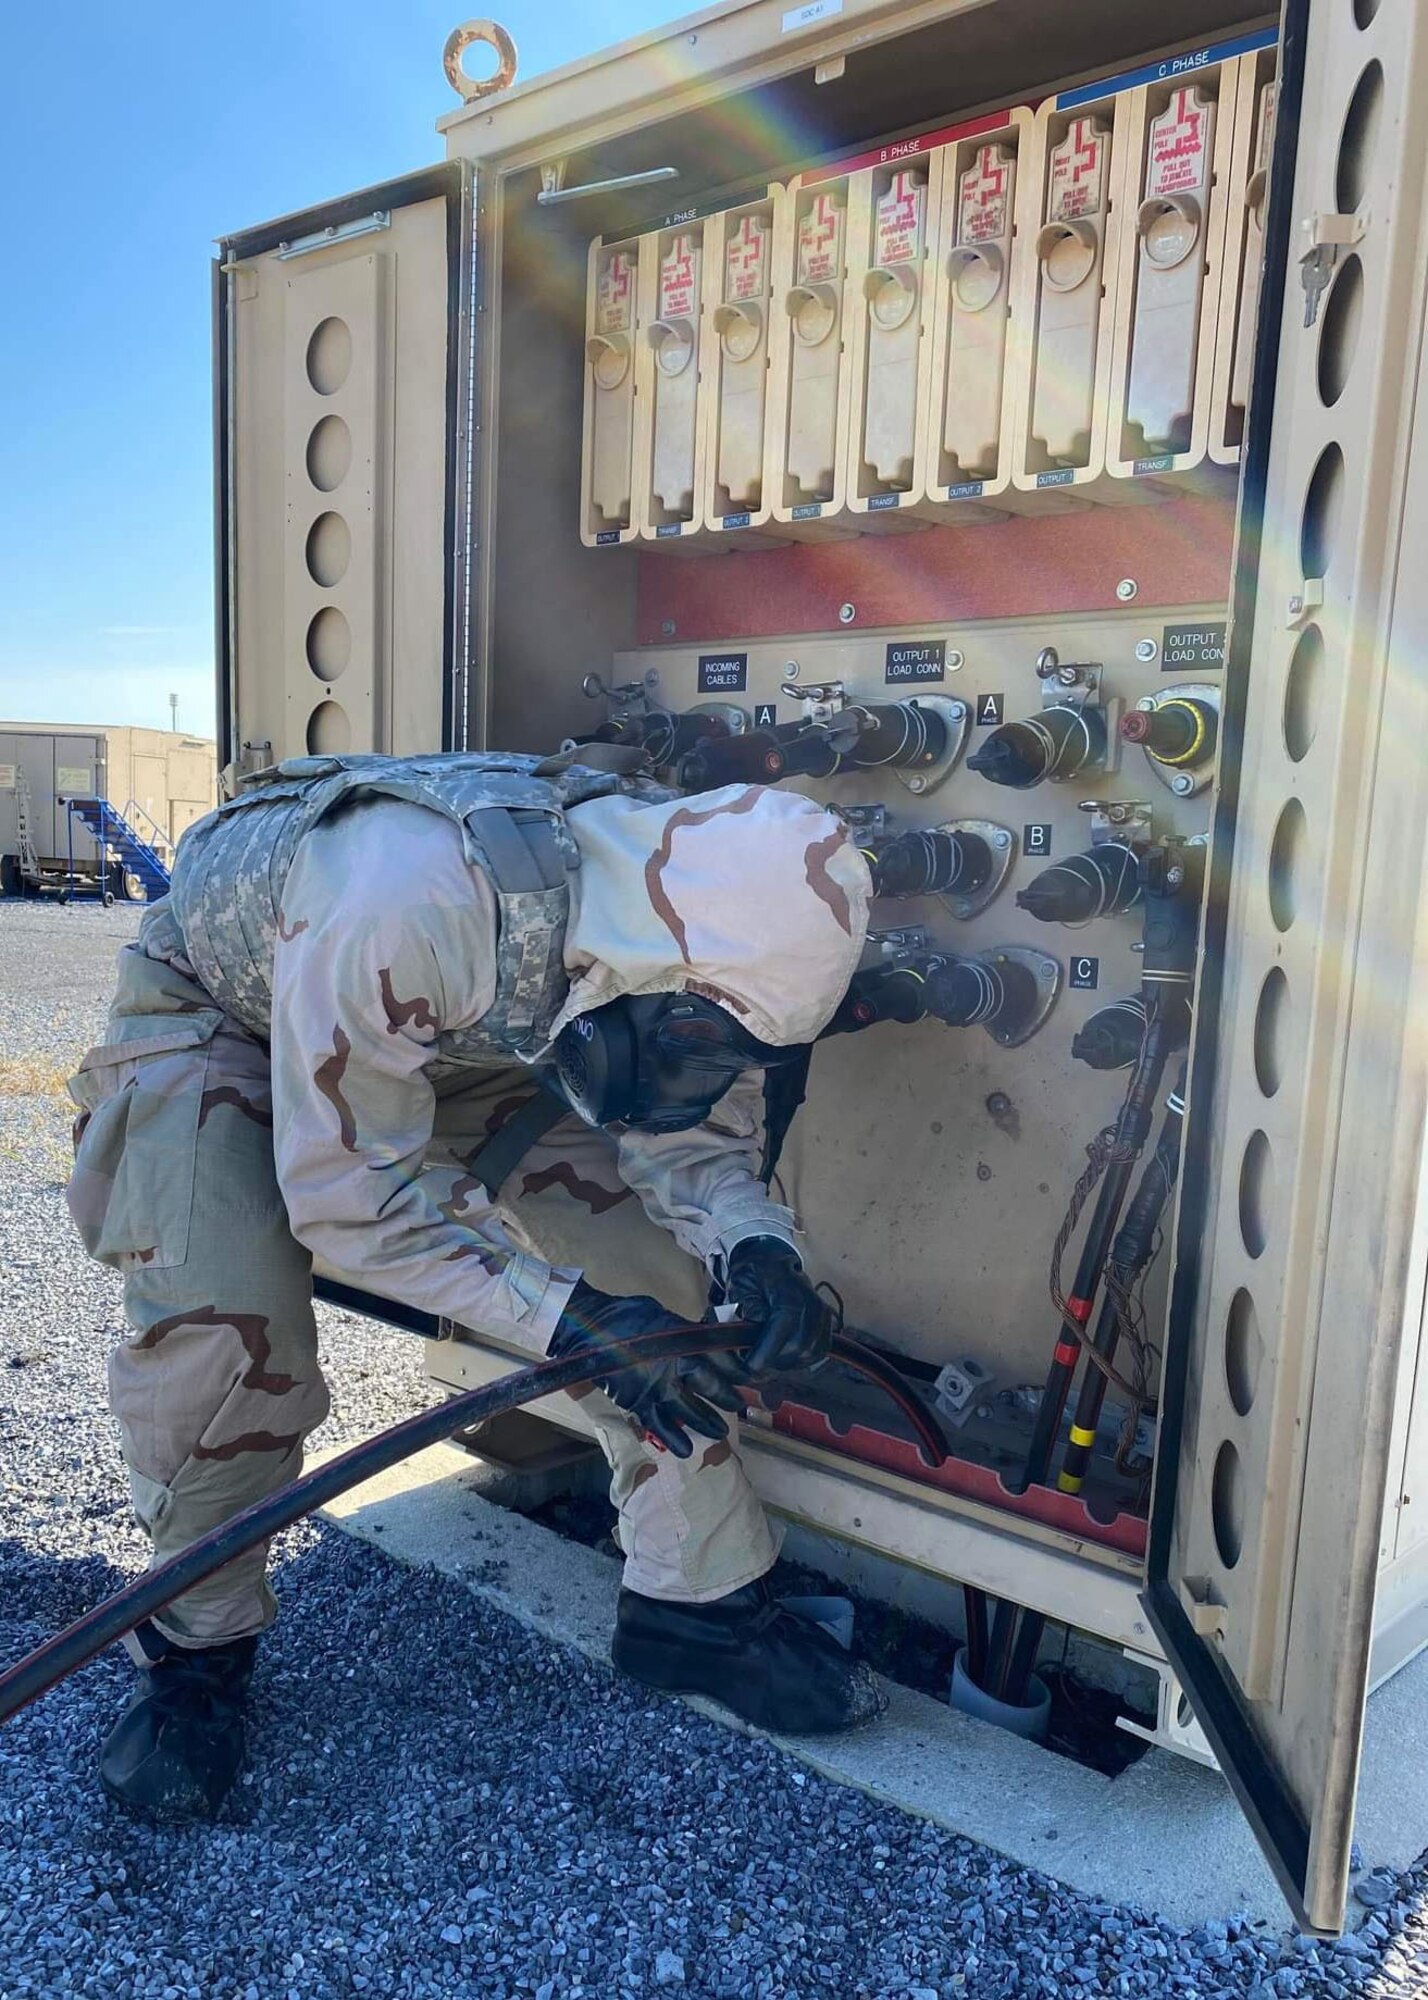 Engineers complete off-site readiness training